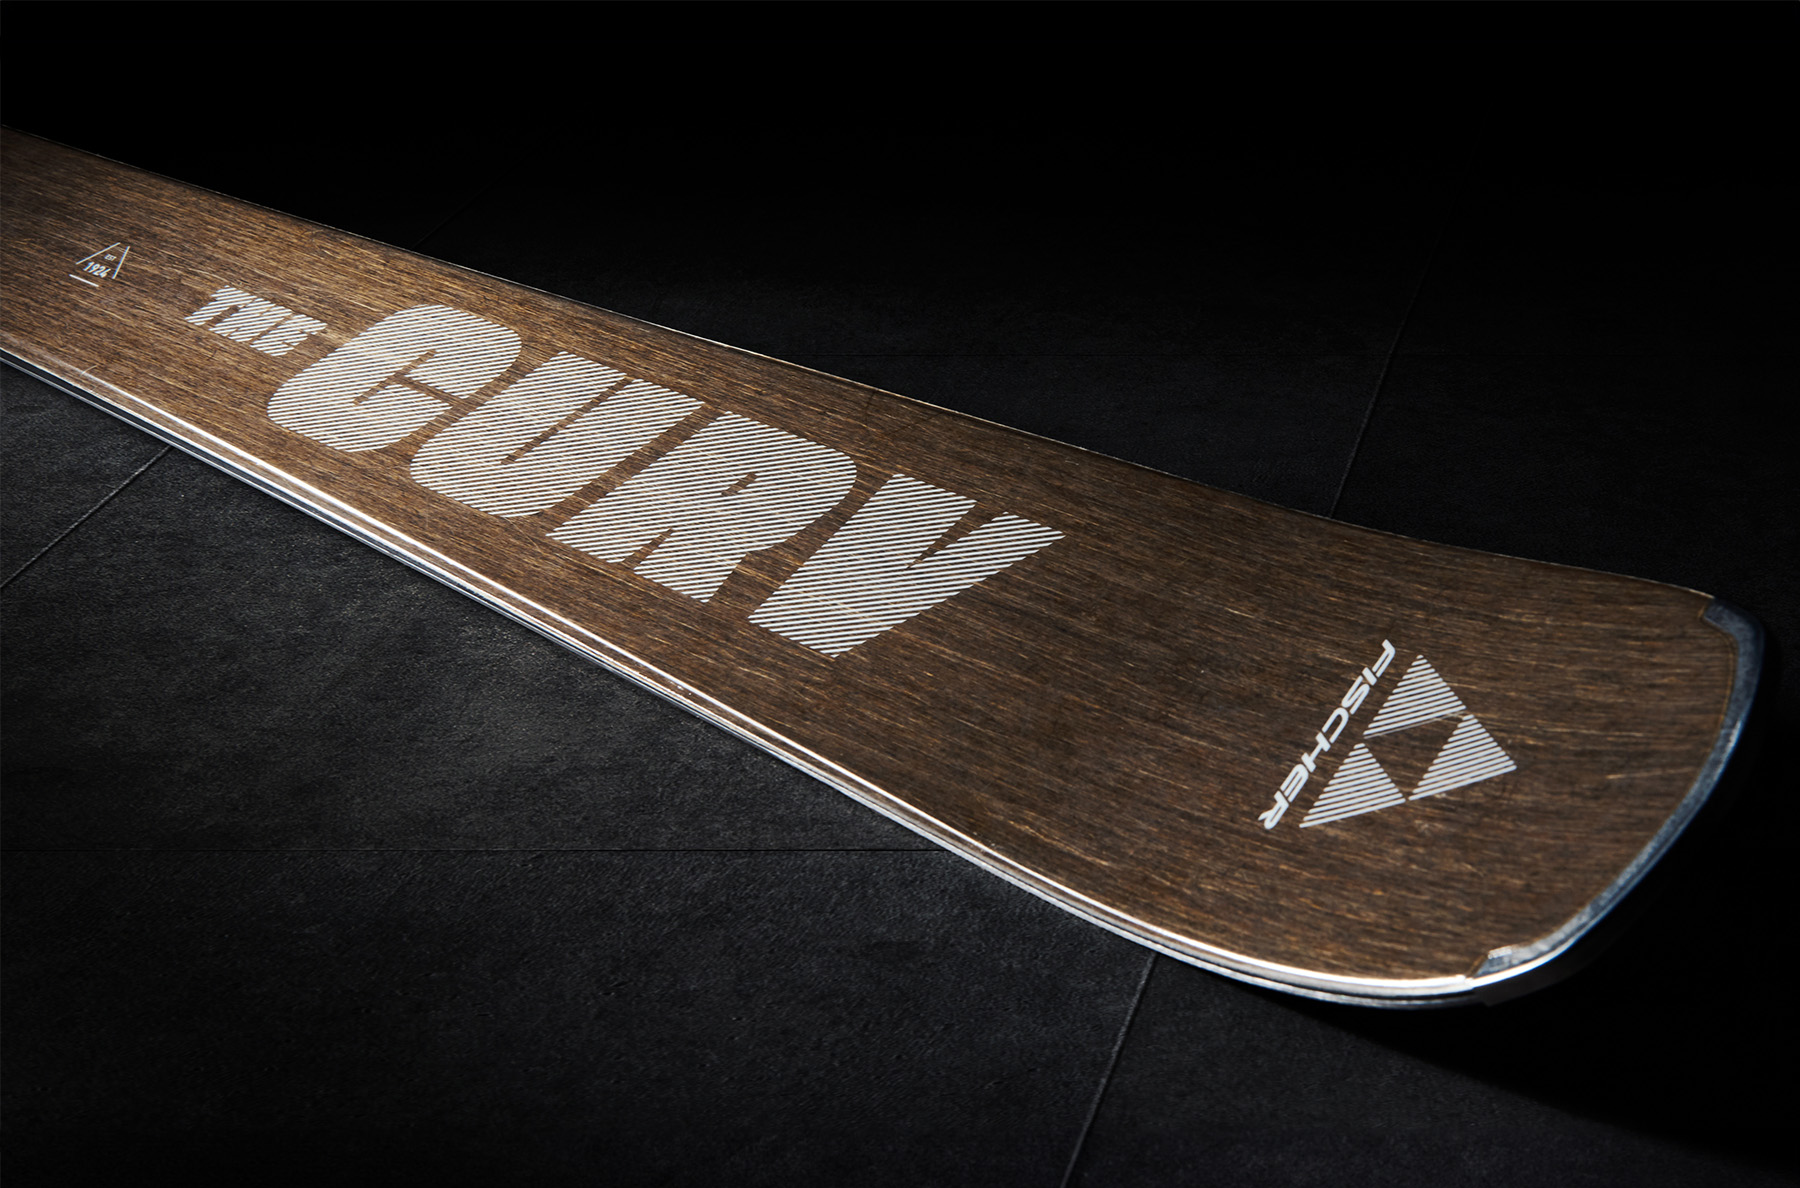 Fischer recently announced new changes to their piste-oriented Curv skis, including four new models — one of which features a construction that reportedly drops its carbon footprint by 36%. Blister discussed the details.